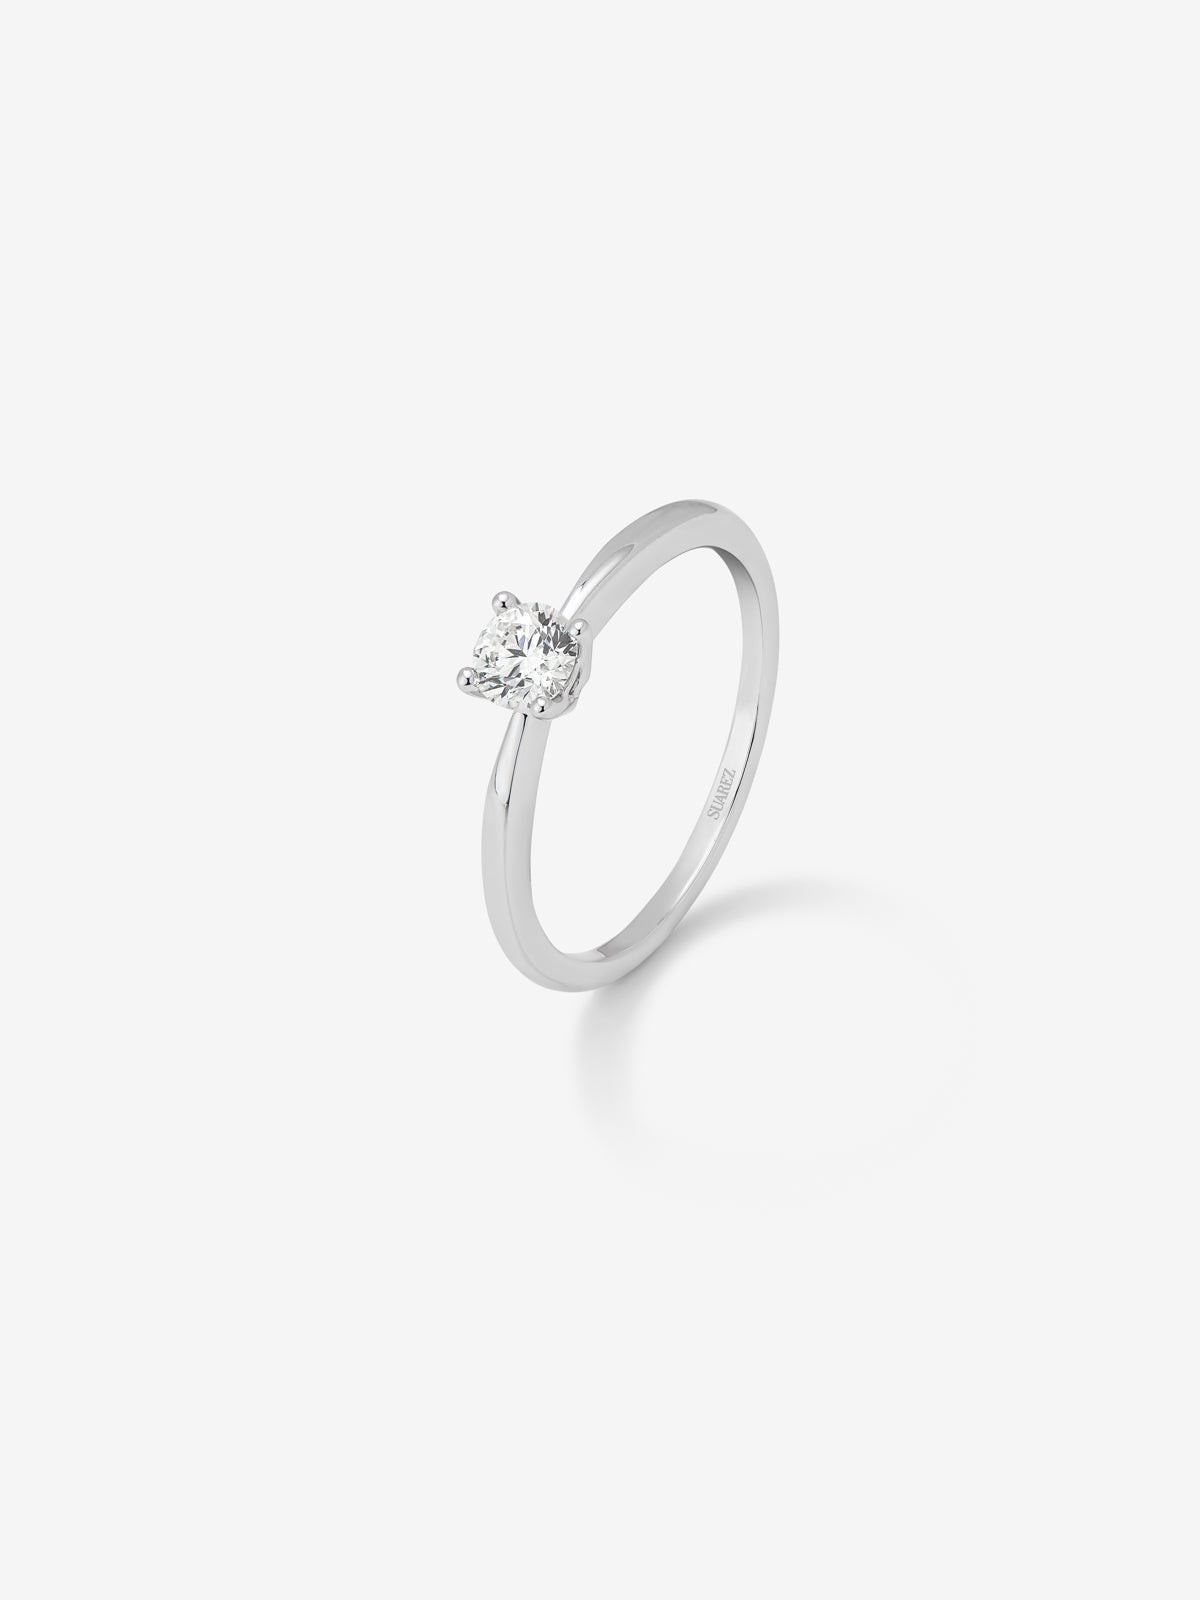 18K white gold solitaire ring with 0.3 ct brilliant cut diamond